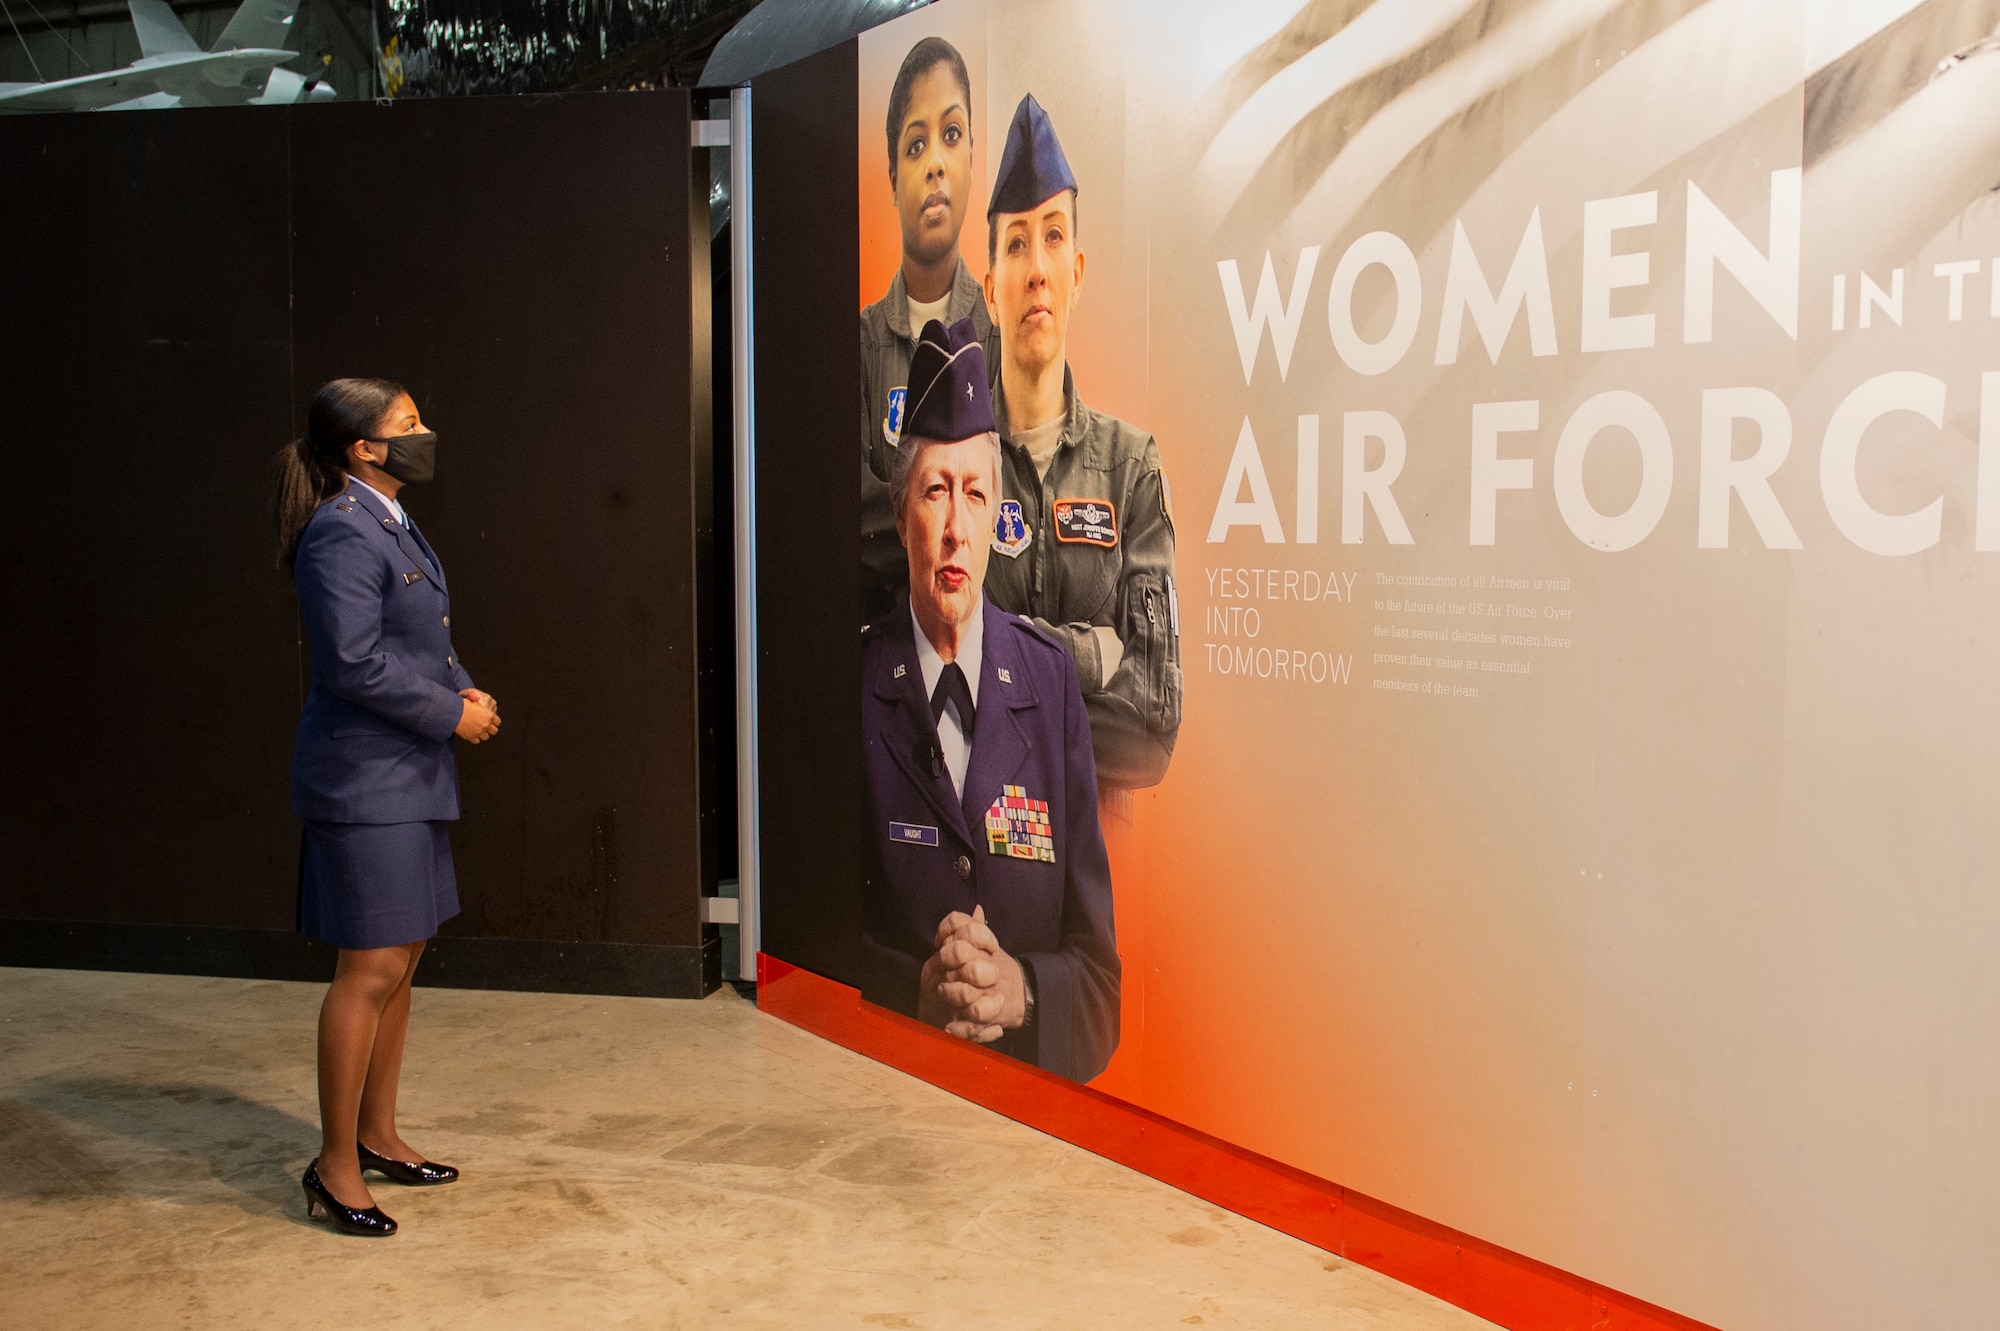 U.S. Air Force Capt. Andrea Lewis, E-8C Joint STARS pilot with the 116th Air Control Wing, Georgia Air National Guard, views her own image at a new National Museum of the U.S. Air Force exhibit at the museum on Wright-Patterson Air Force Base, Ohio, Mar. 5, 2021. The exhibit, which celebrates female aviators’ accomplishments, opened in March in honor of Women’s History Month. (U.S. Air National Guard photo by Master Sgt. Nancy Goldberger)